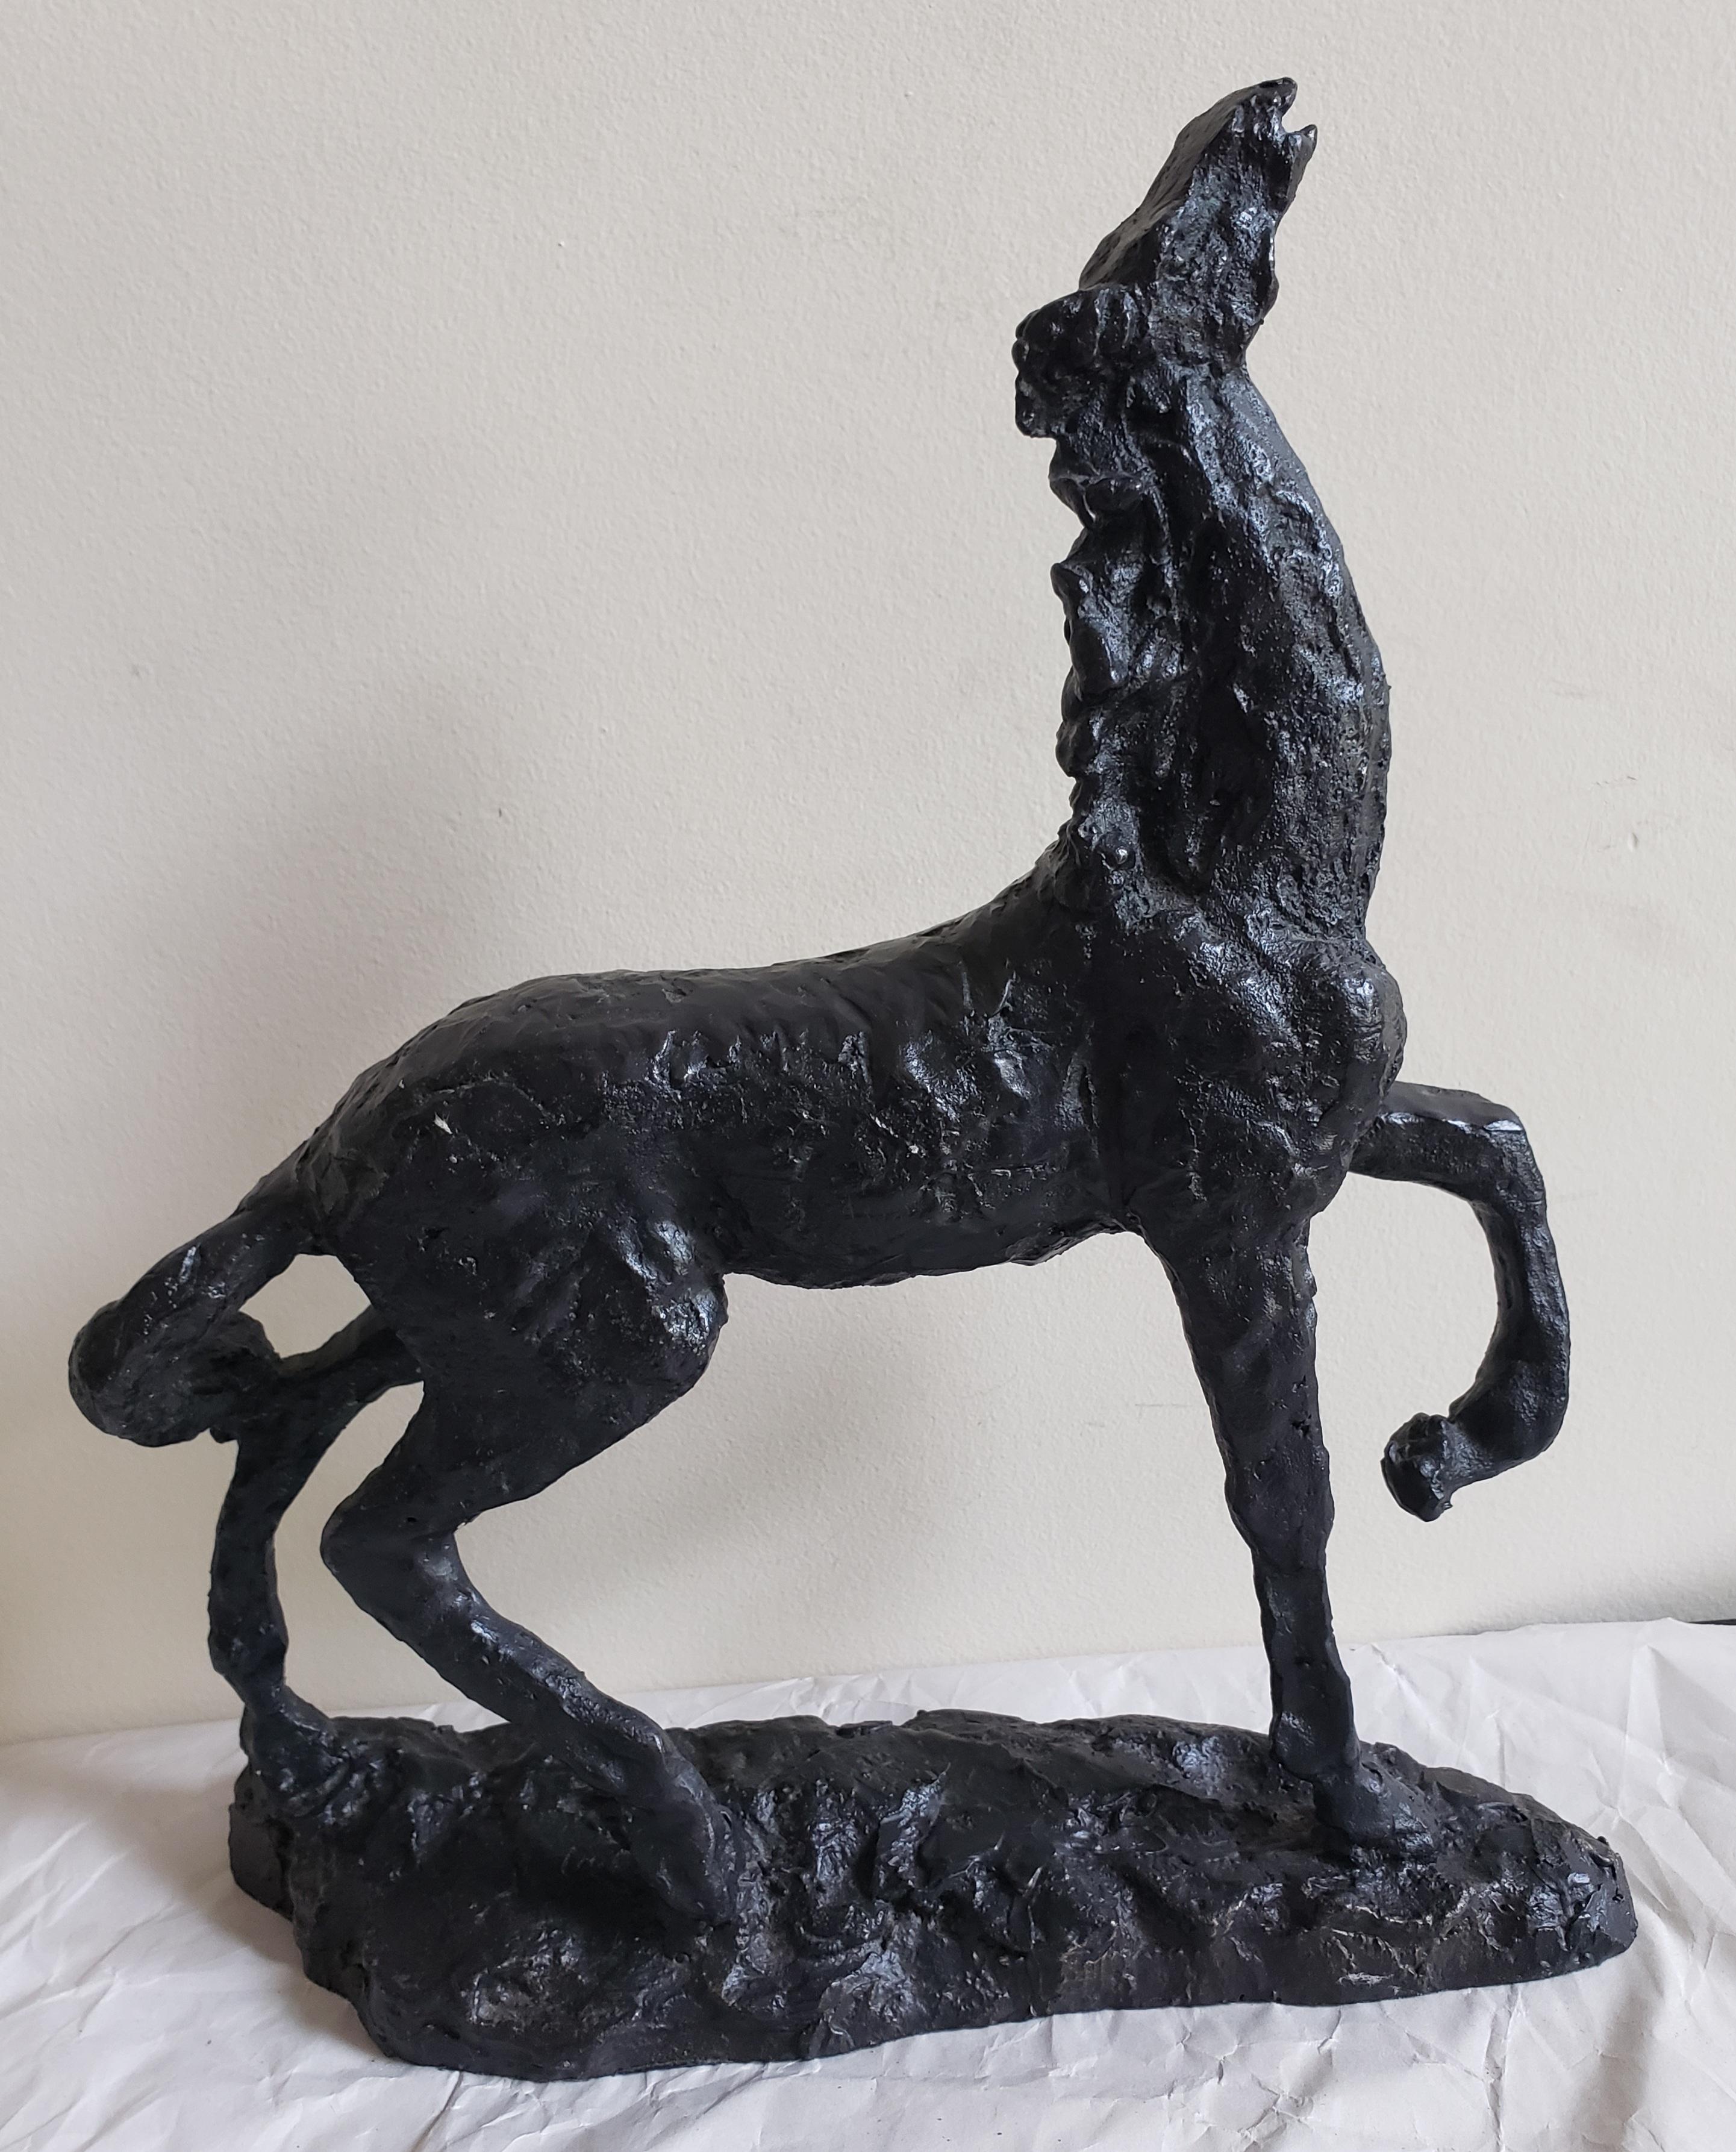 Mid-Century Brutalist Bronze Sculpture of a Horse in great vintage condition.
Measures 11